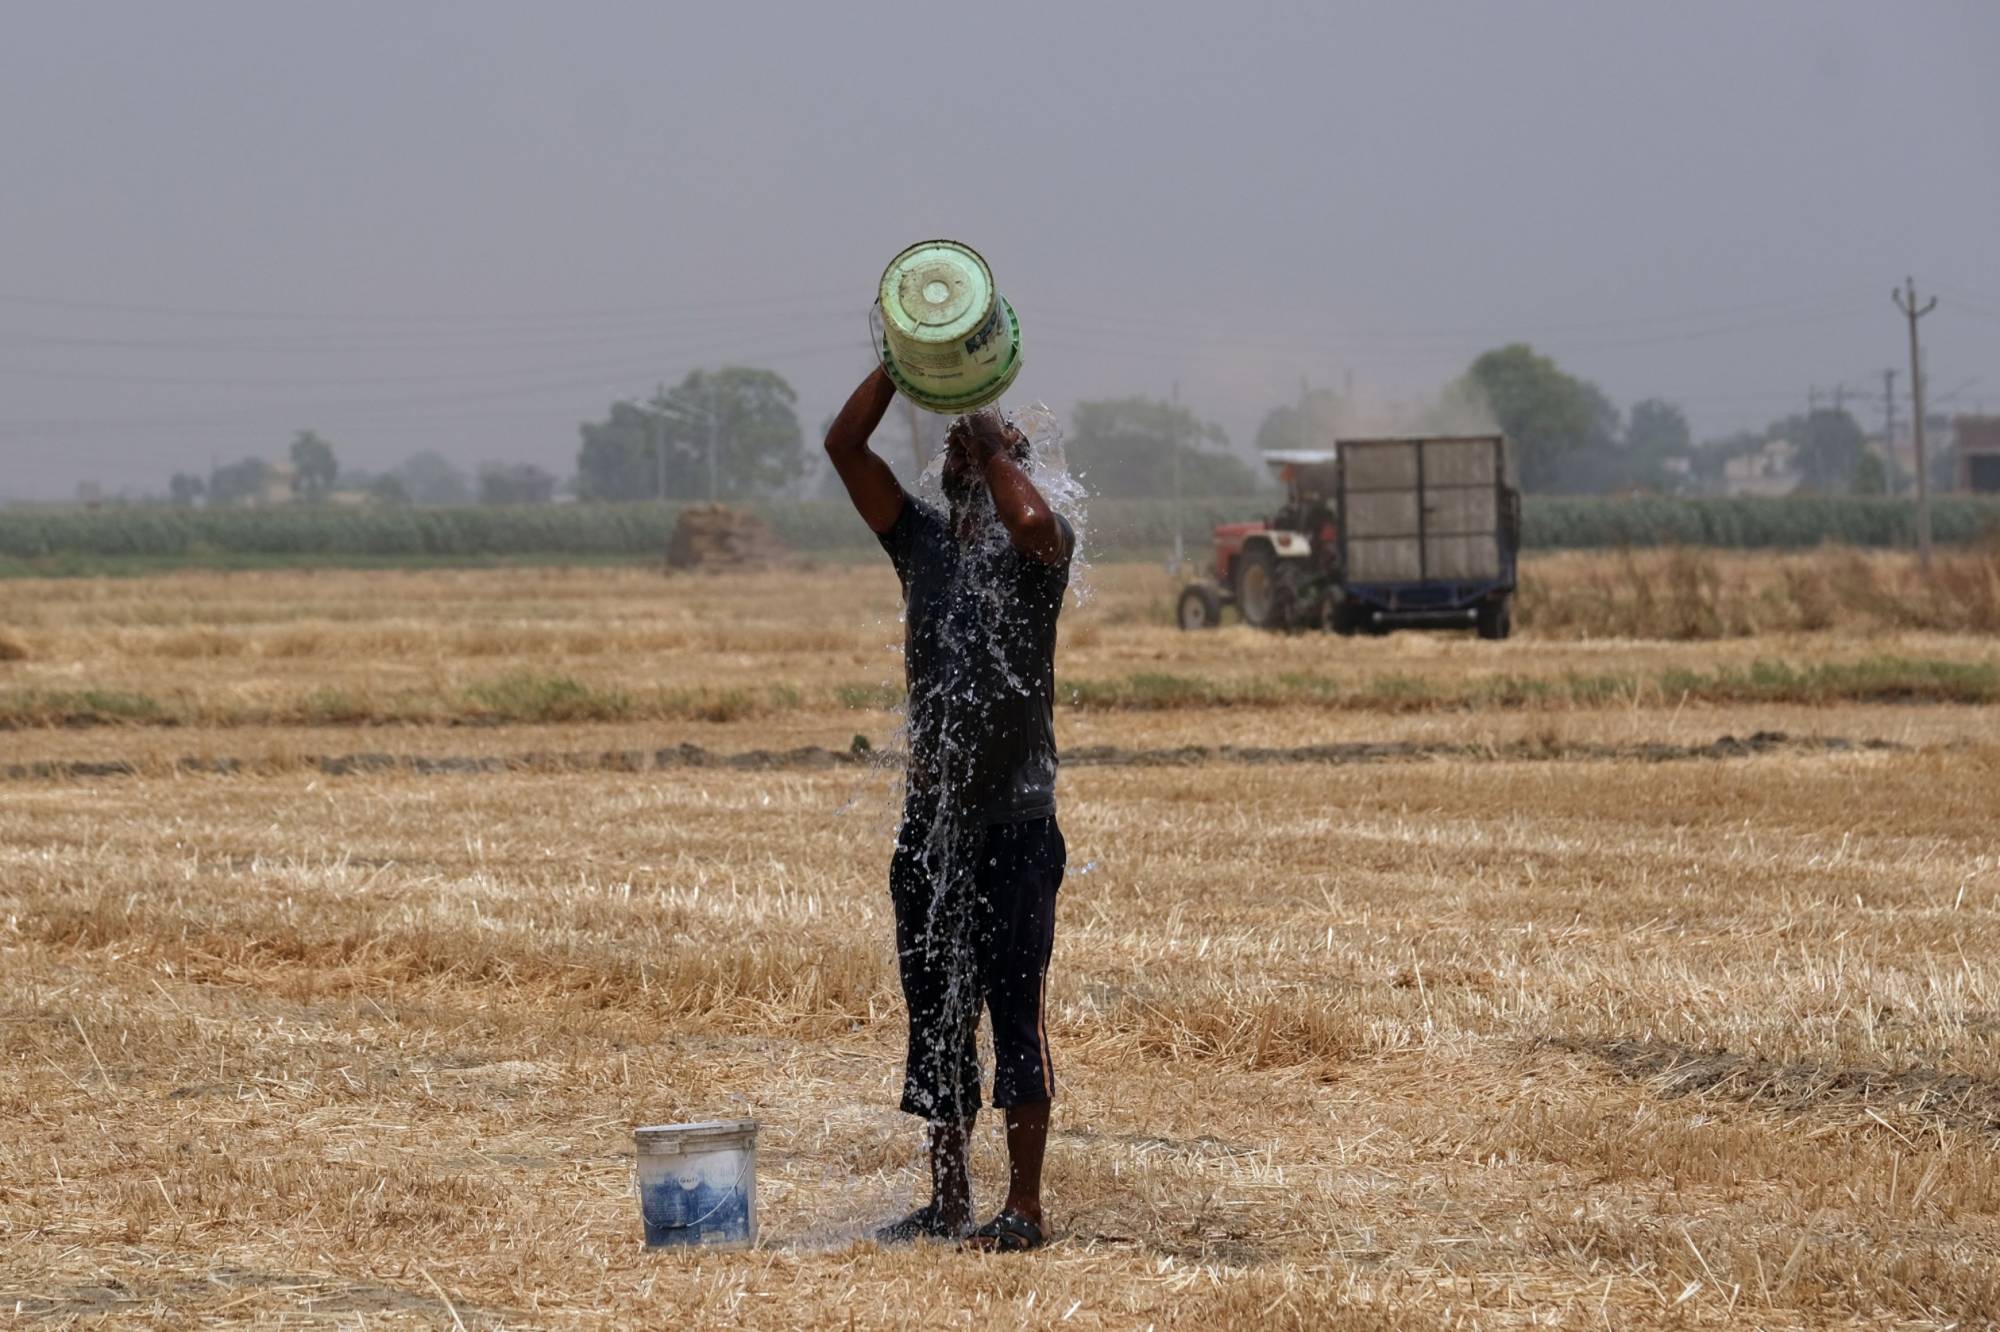 A farmer pours water on himself while working at a wheat farm in Punjab, India, in May 2022.  | BLOOMBERG